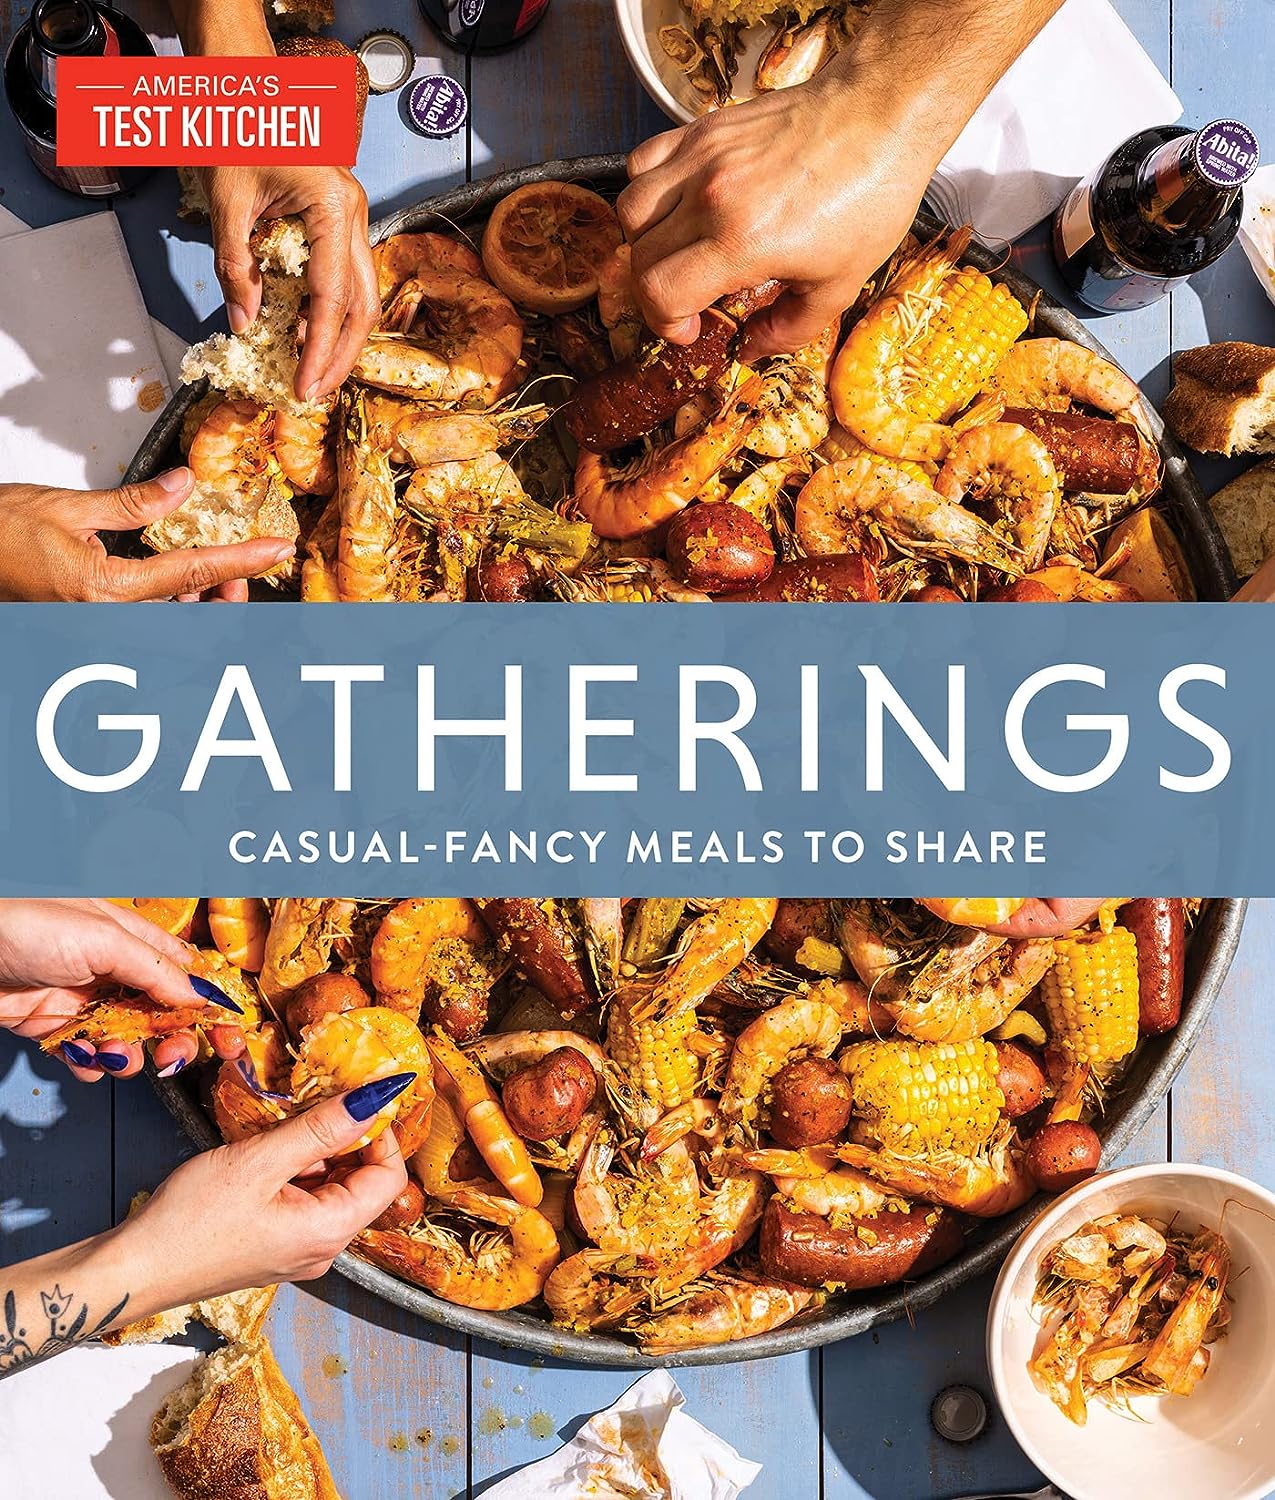 Gatherings: Casual-Fancy Meals to Share (America's Test Kitchen)